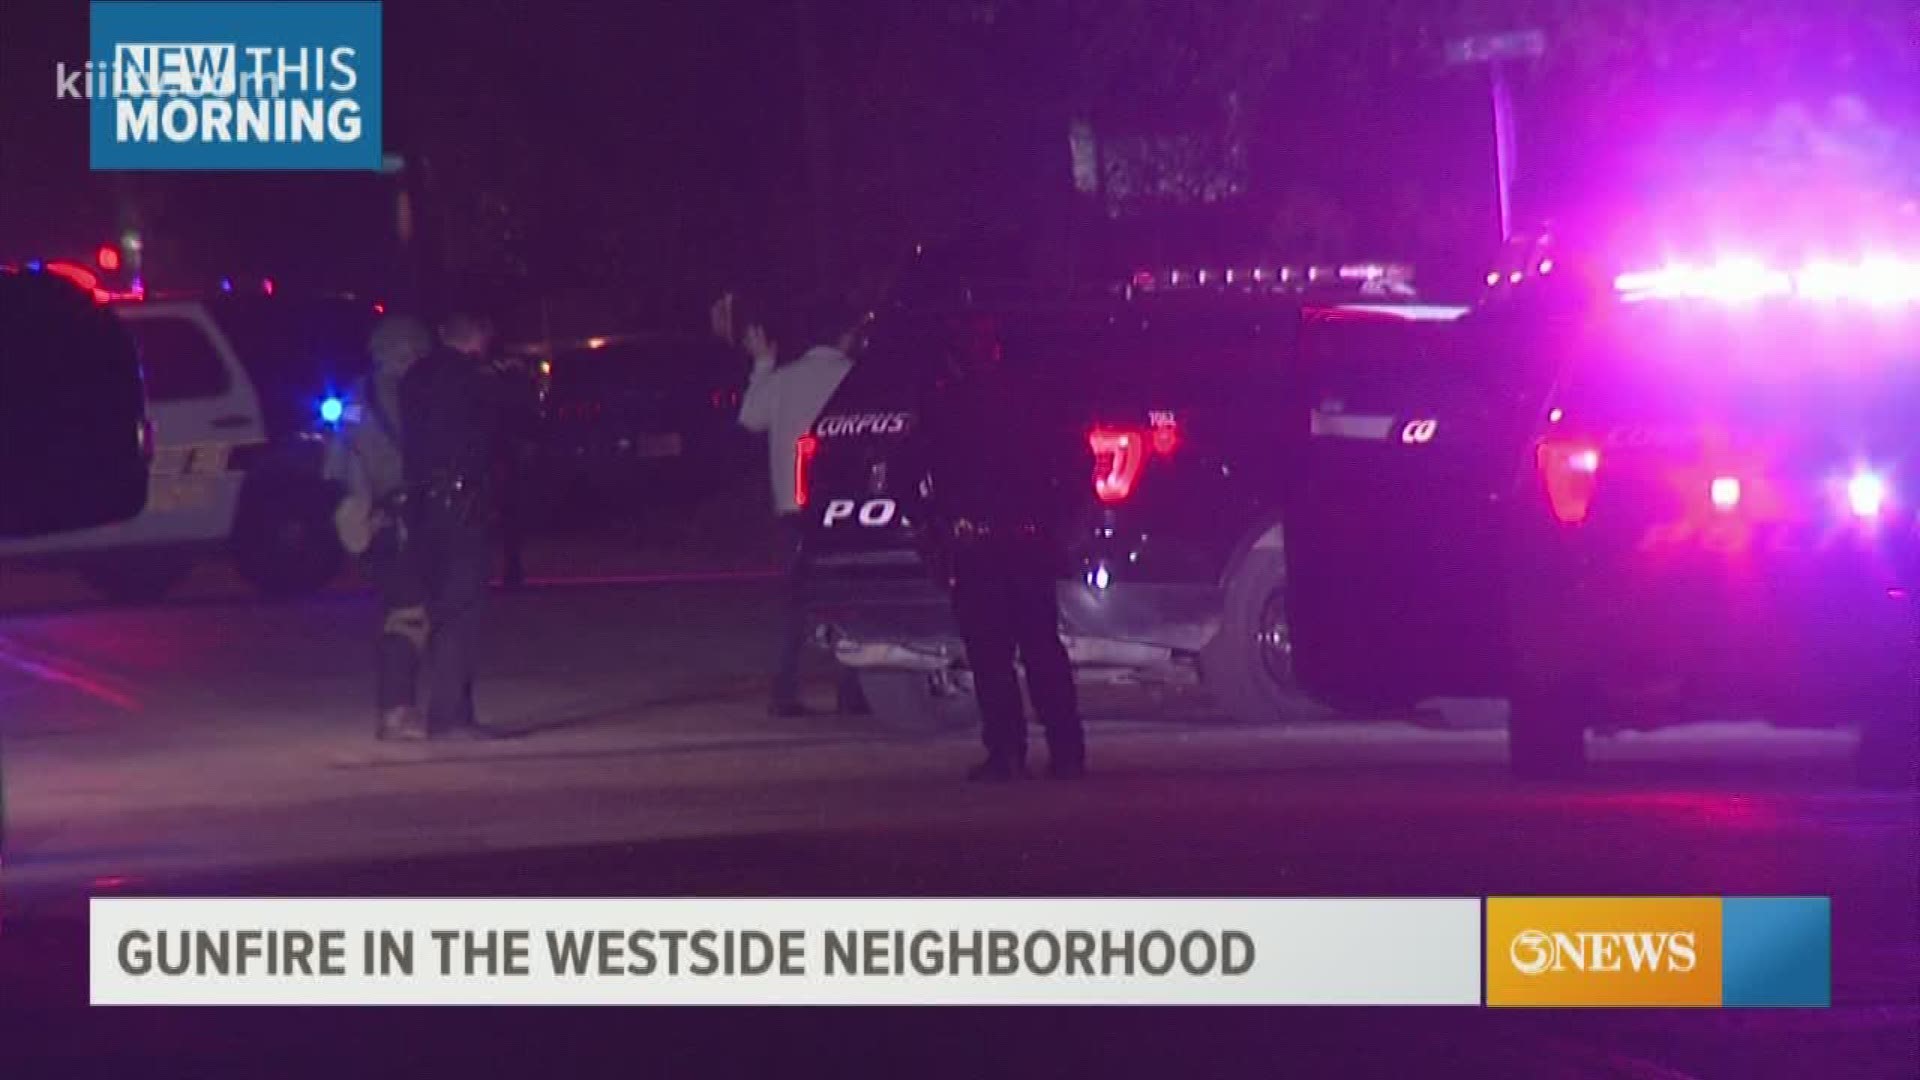 Some residents in Corpus Christi's westside woke up Monday morning to shots being fired in their neighborhood.